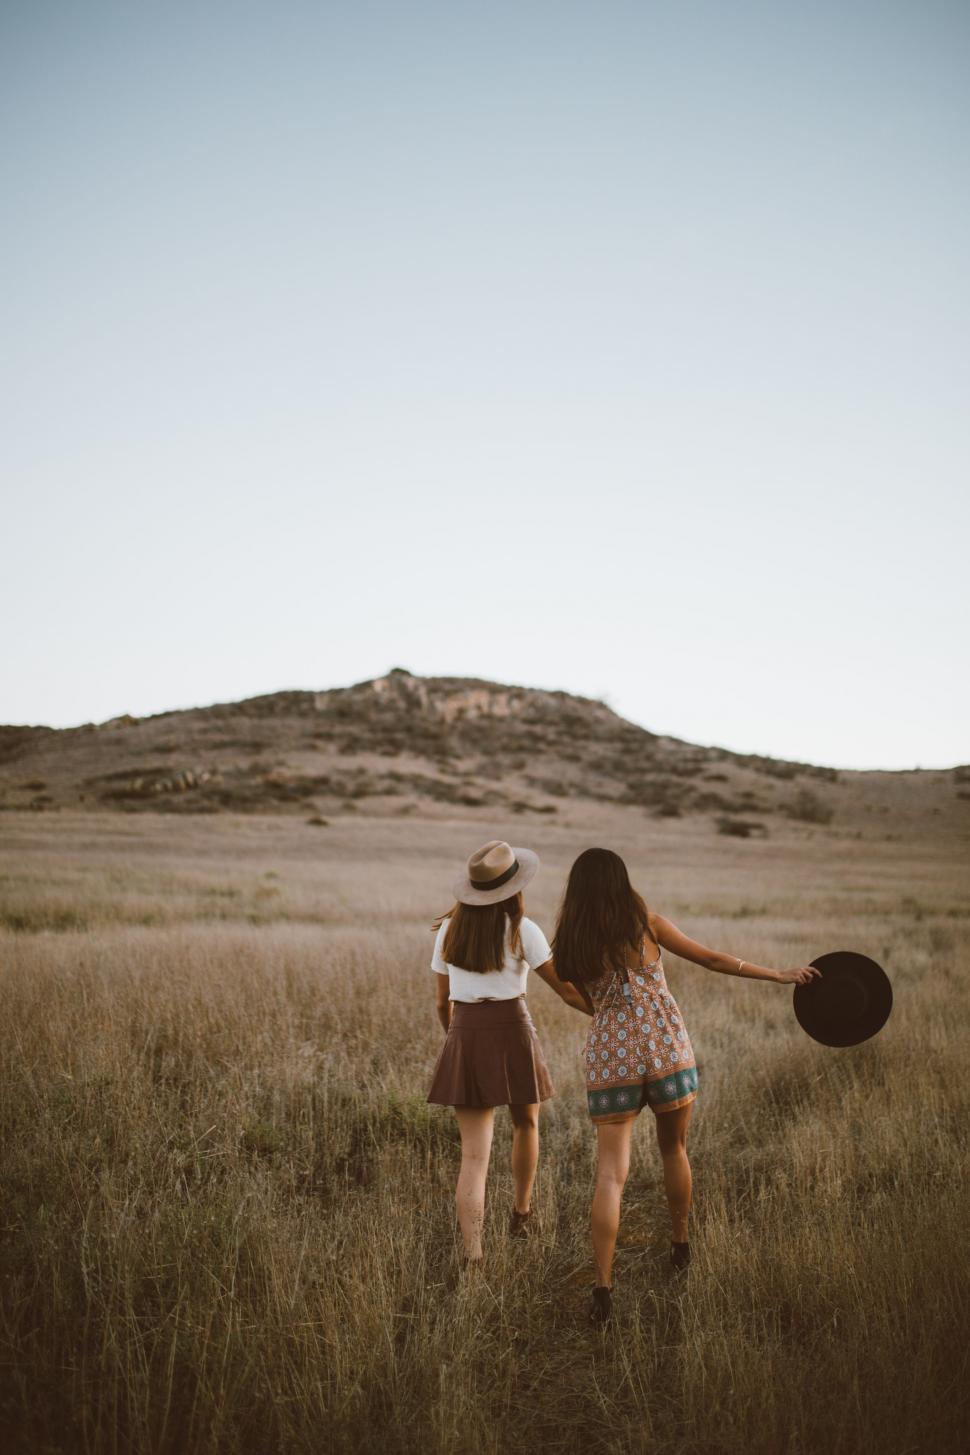 Free Image of Two Girls in a Field Holding a Frisbee 